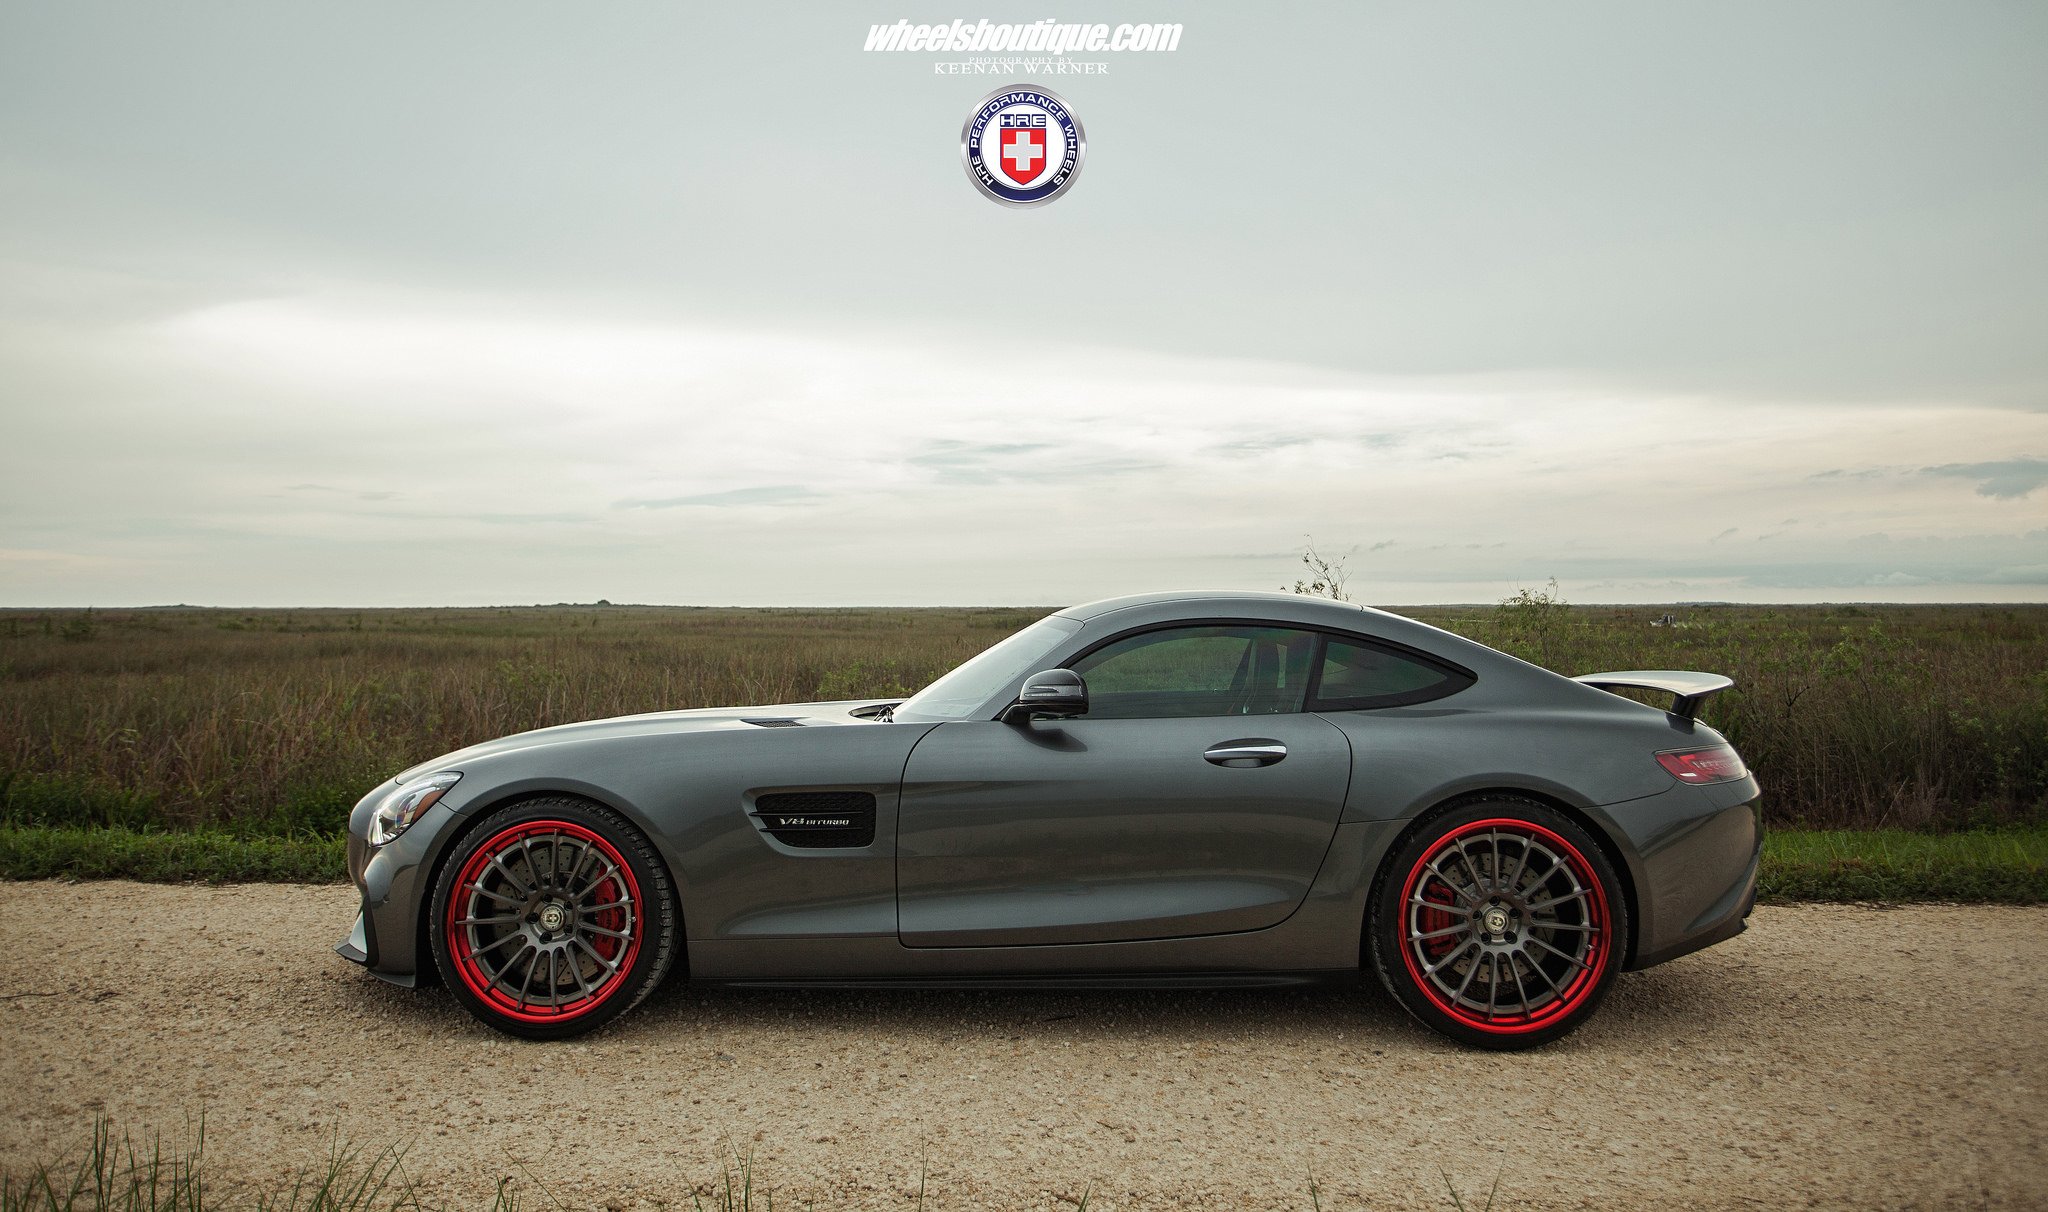 mercedes, Amg, Gts, Hre, Wheels, Cars, Coupe Wallpaper